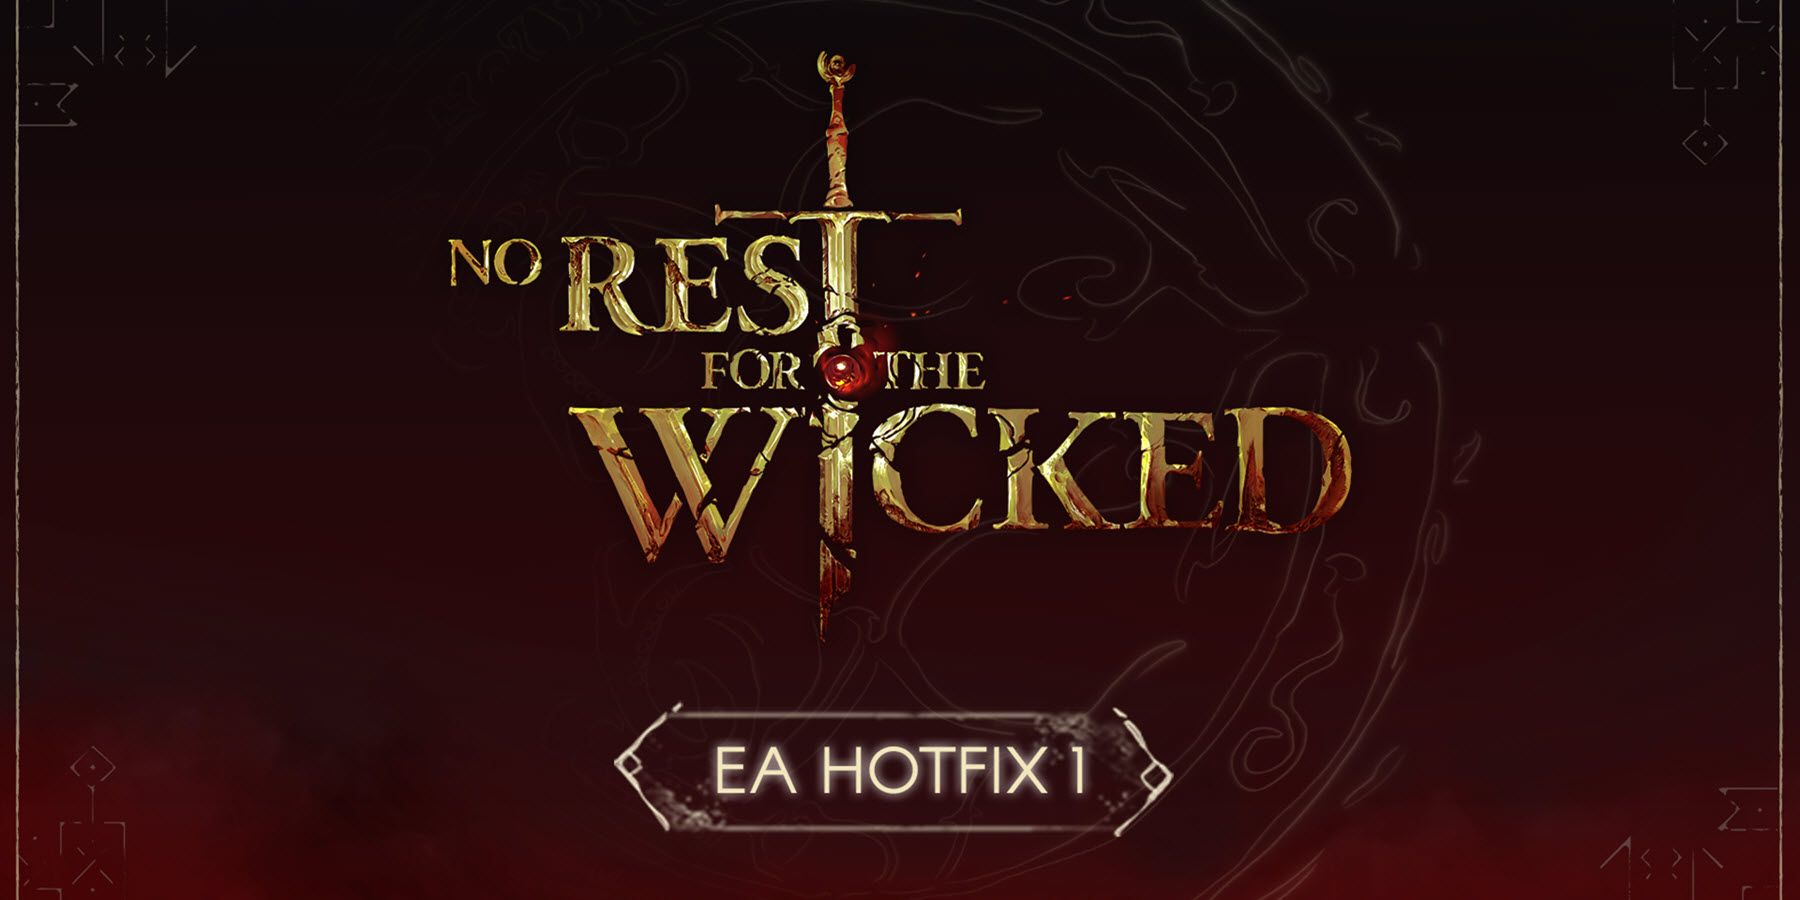 no rest for the wicked hotfix 1